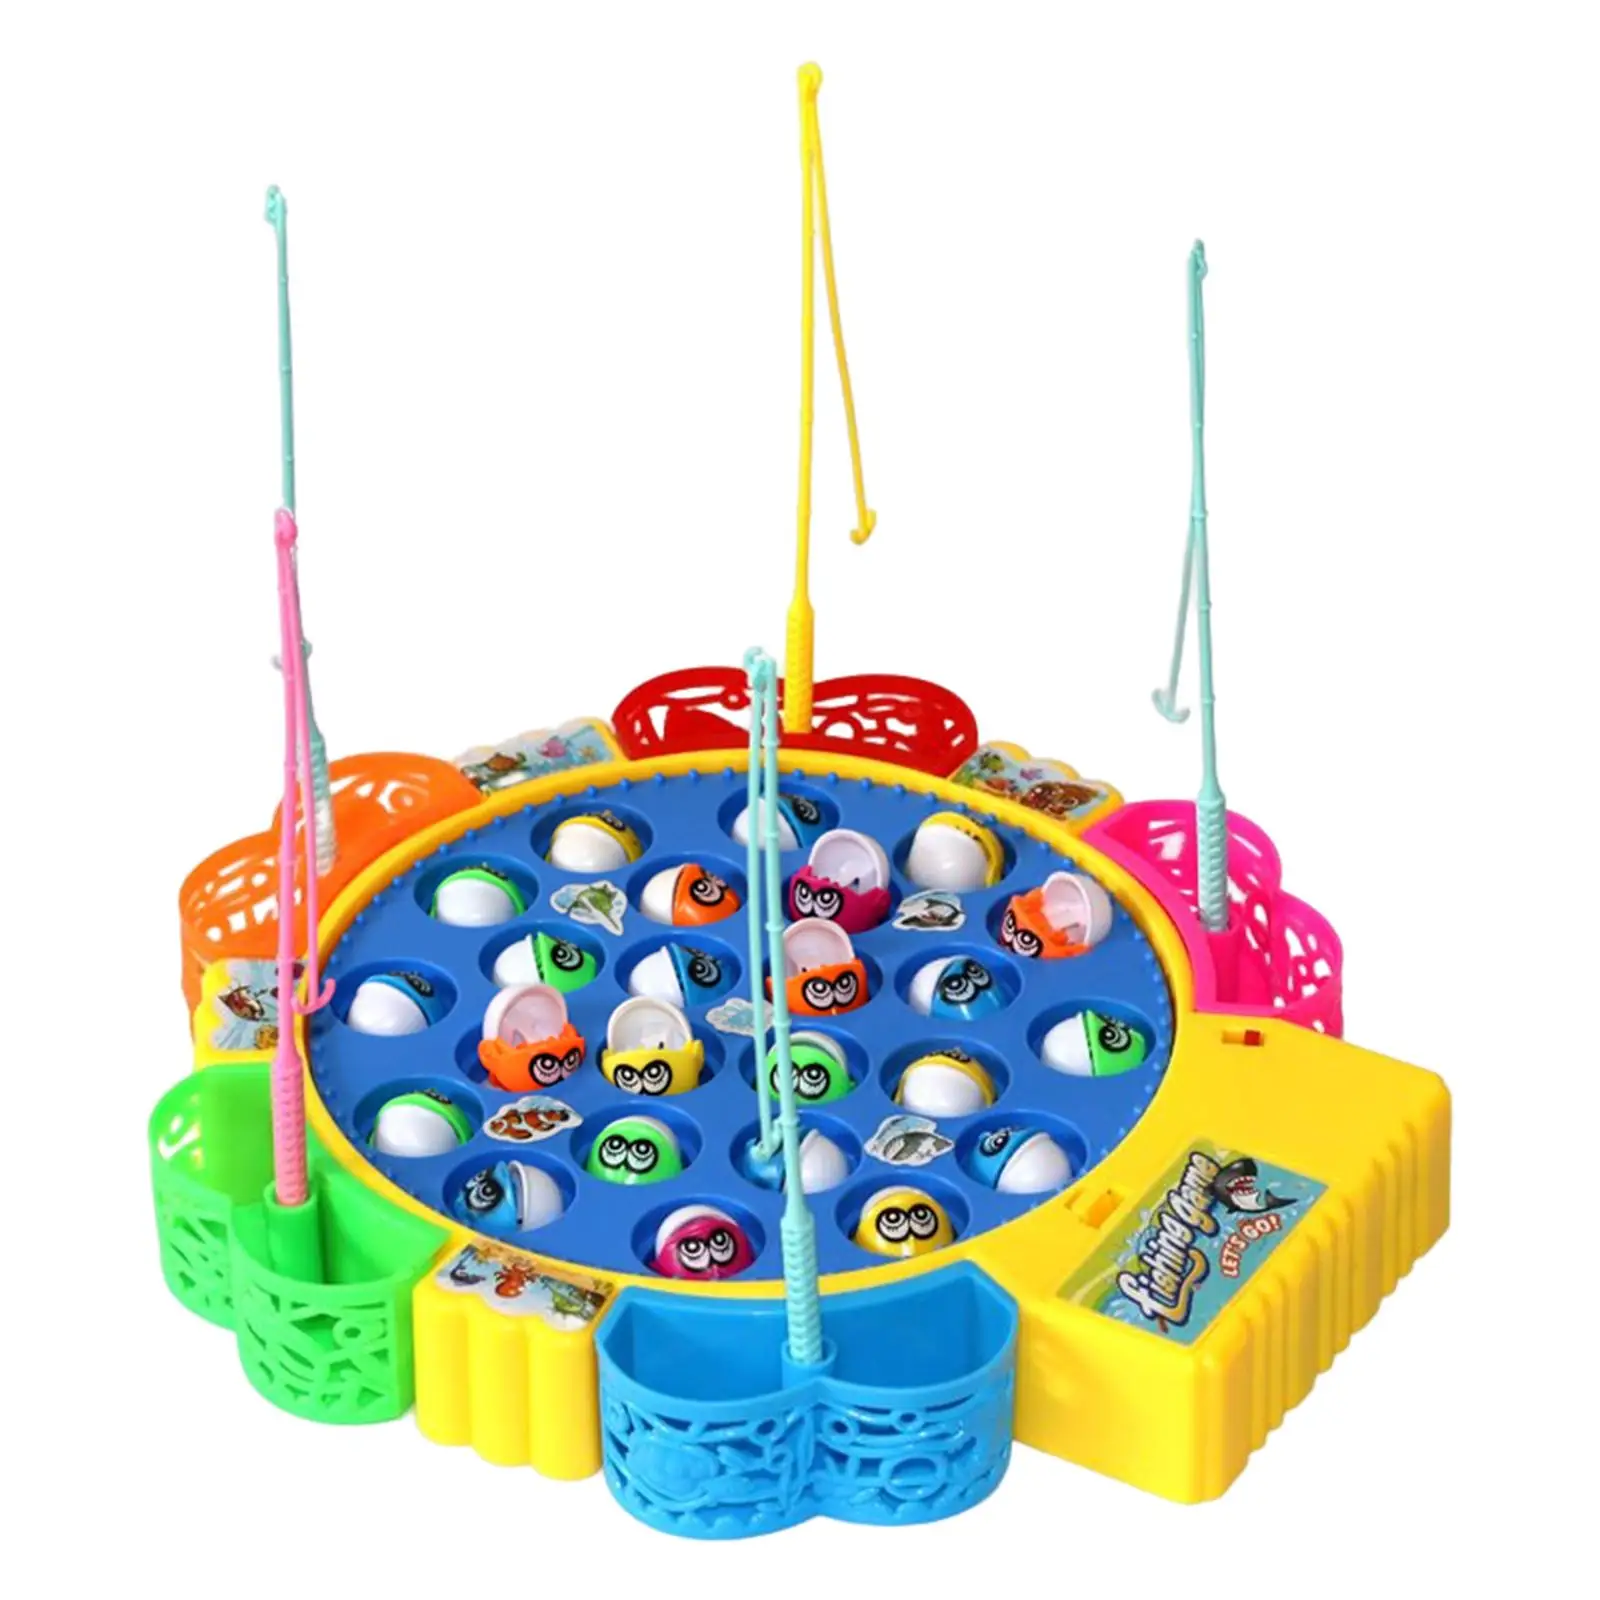 Novelty Rotating Fishing Game Kids toy, kids Fishing Toy for 3-5 Years Old Kids Children Educational Toy Early Learning Toy